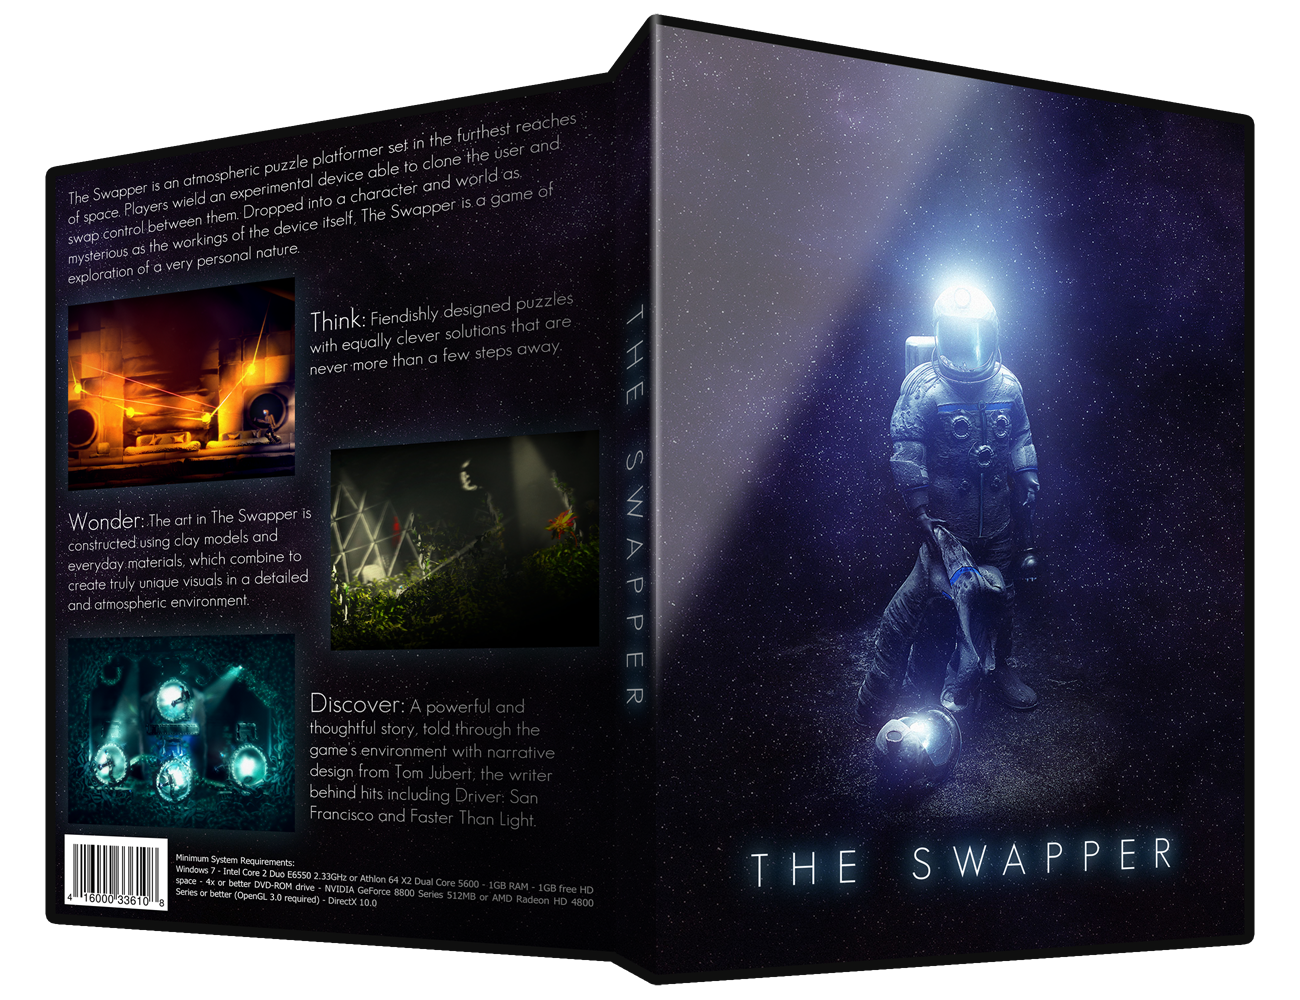 The Swapper box cover